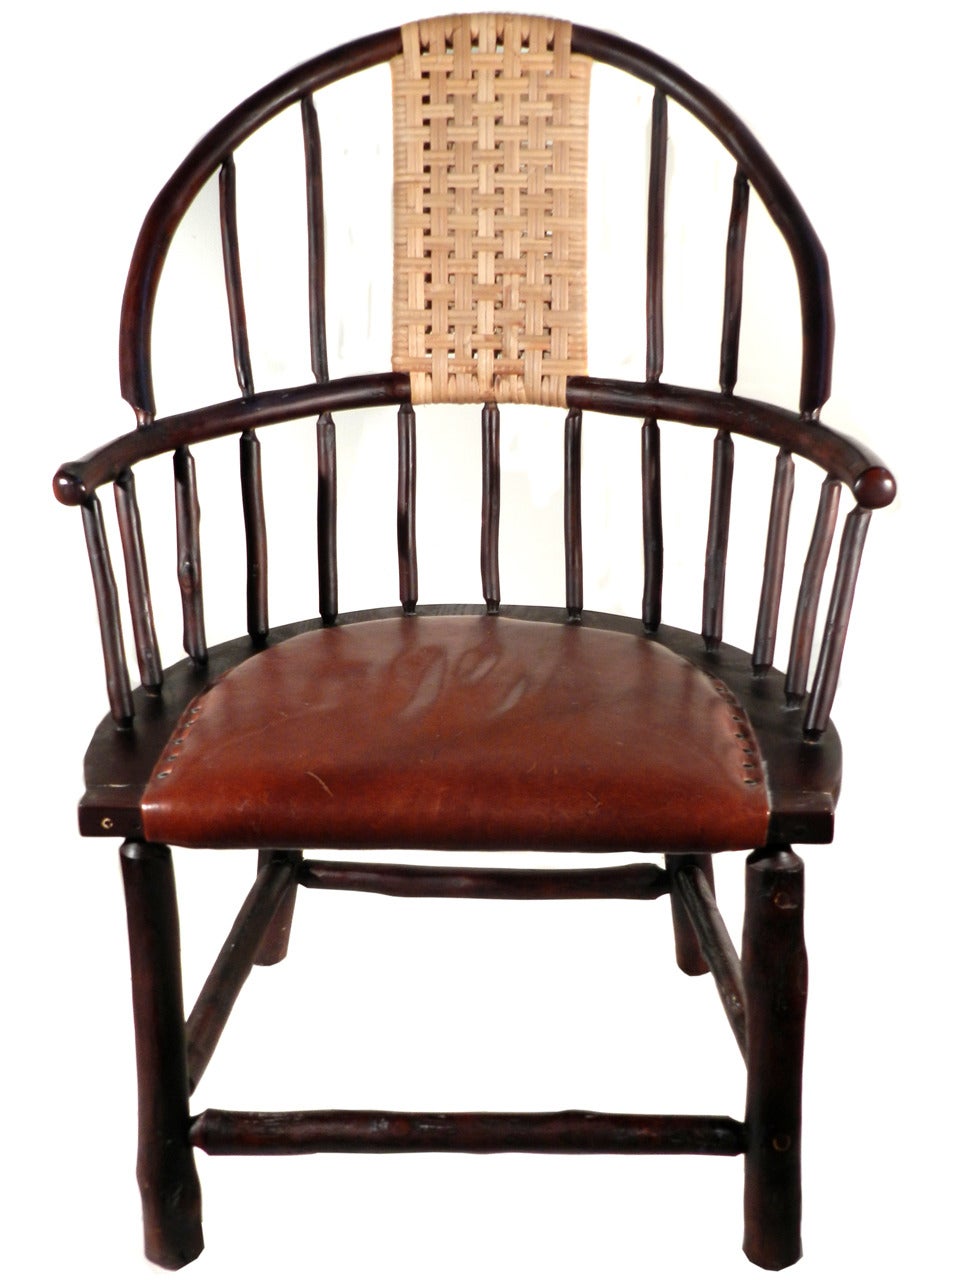 This grand country old hickory Windsor chair is a beautiful combination of hickory, rattan and leather. It was created and signed by Flat Rock Furniture and is their oversized custom 061 Windsor chair. They are the very high end of Adirondack Old